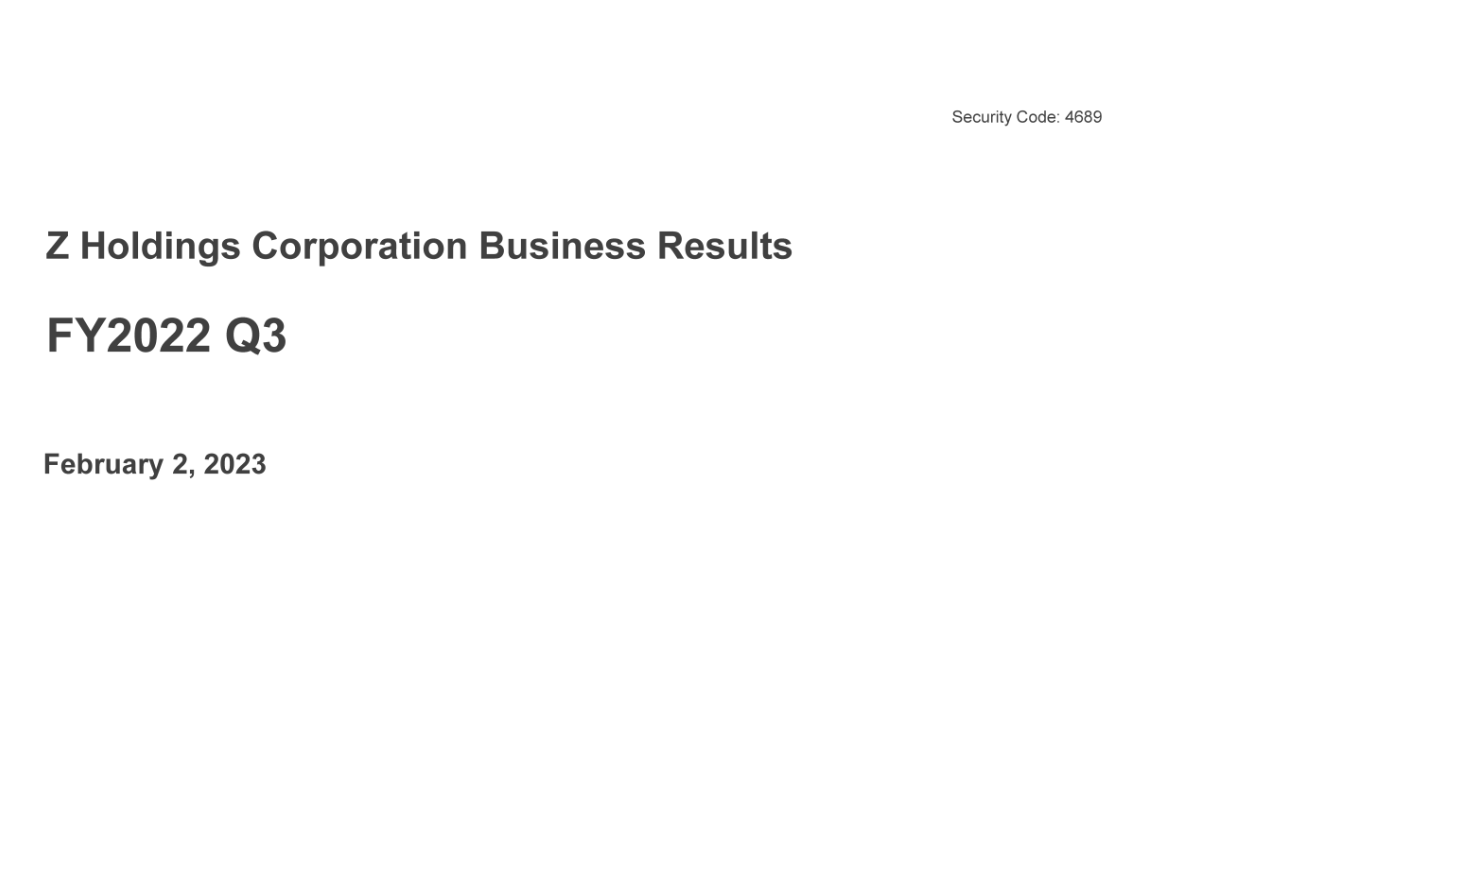 FY2022 Q3 Business Results